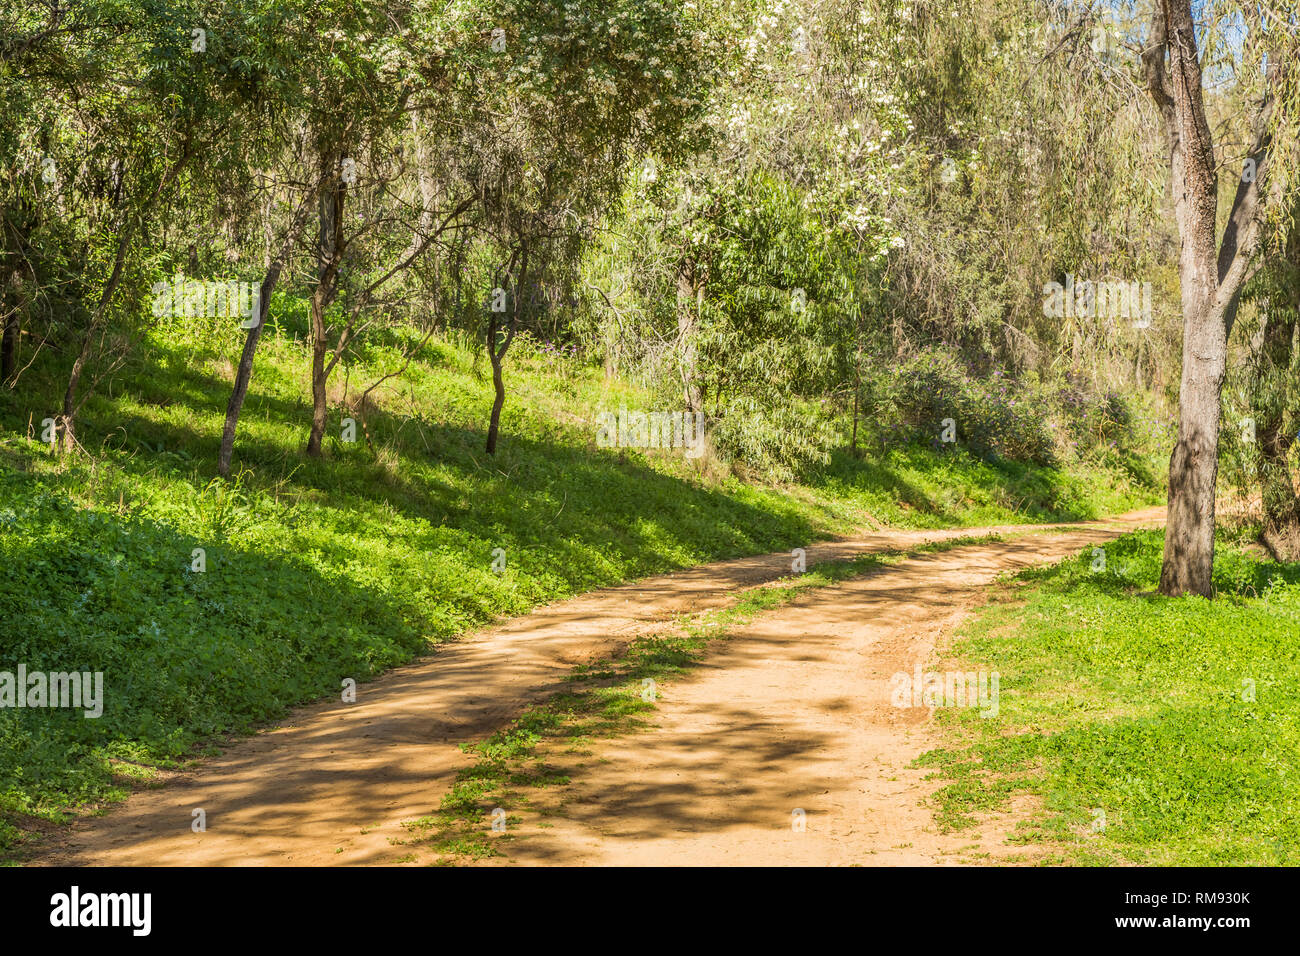 Dirt road through the trees in the Upper Hunter Valley, NSW, Australia. Stock Photo